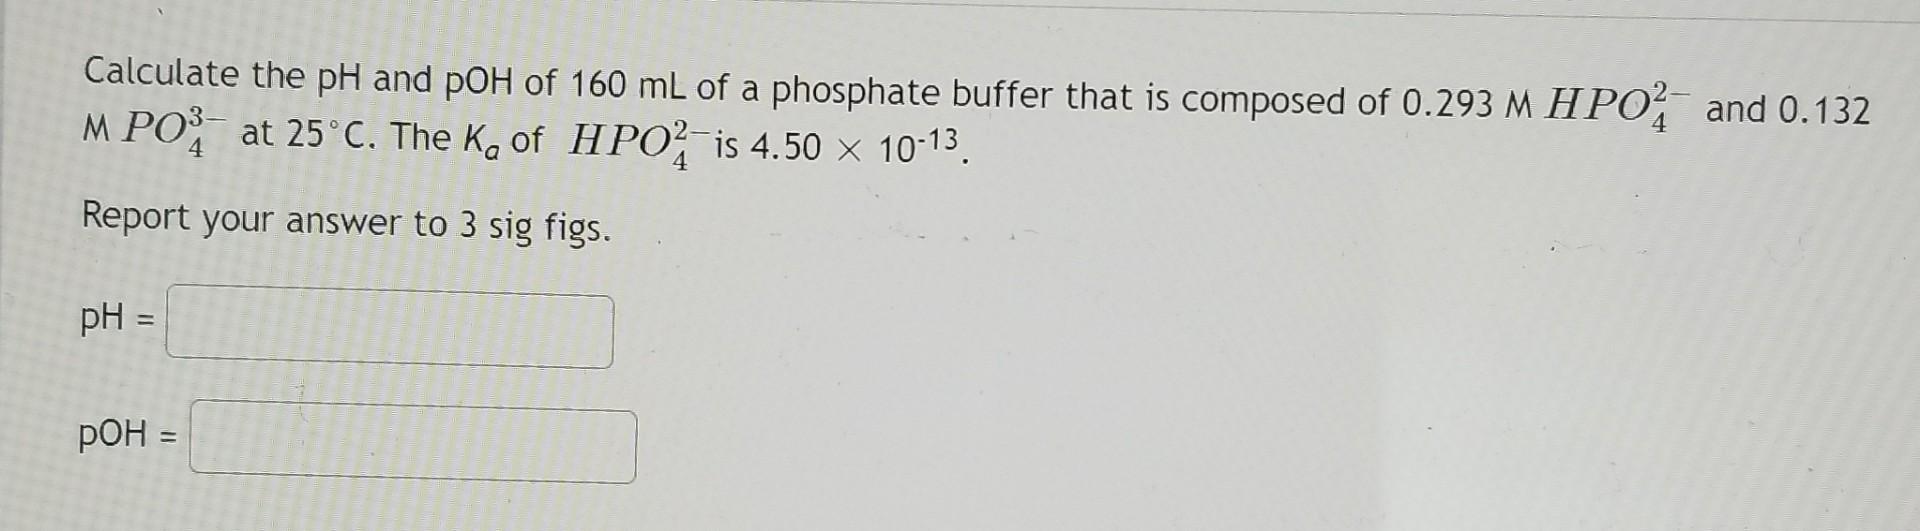 Calculate the pH and pOH of 160 mL of a phosphate | Chegg.com